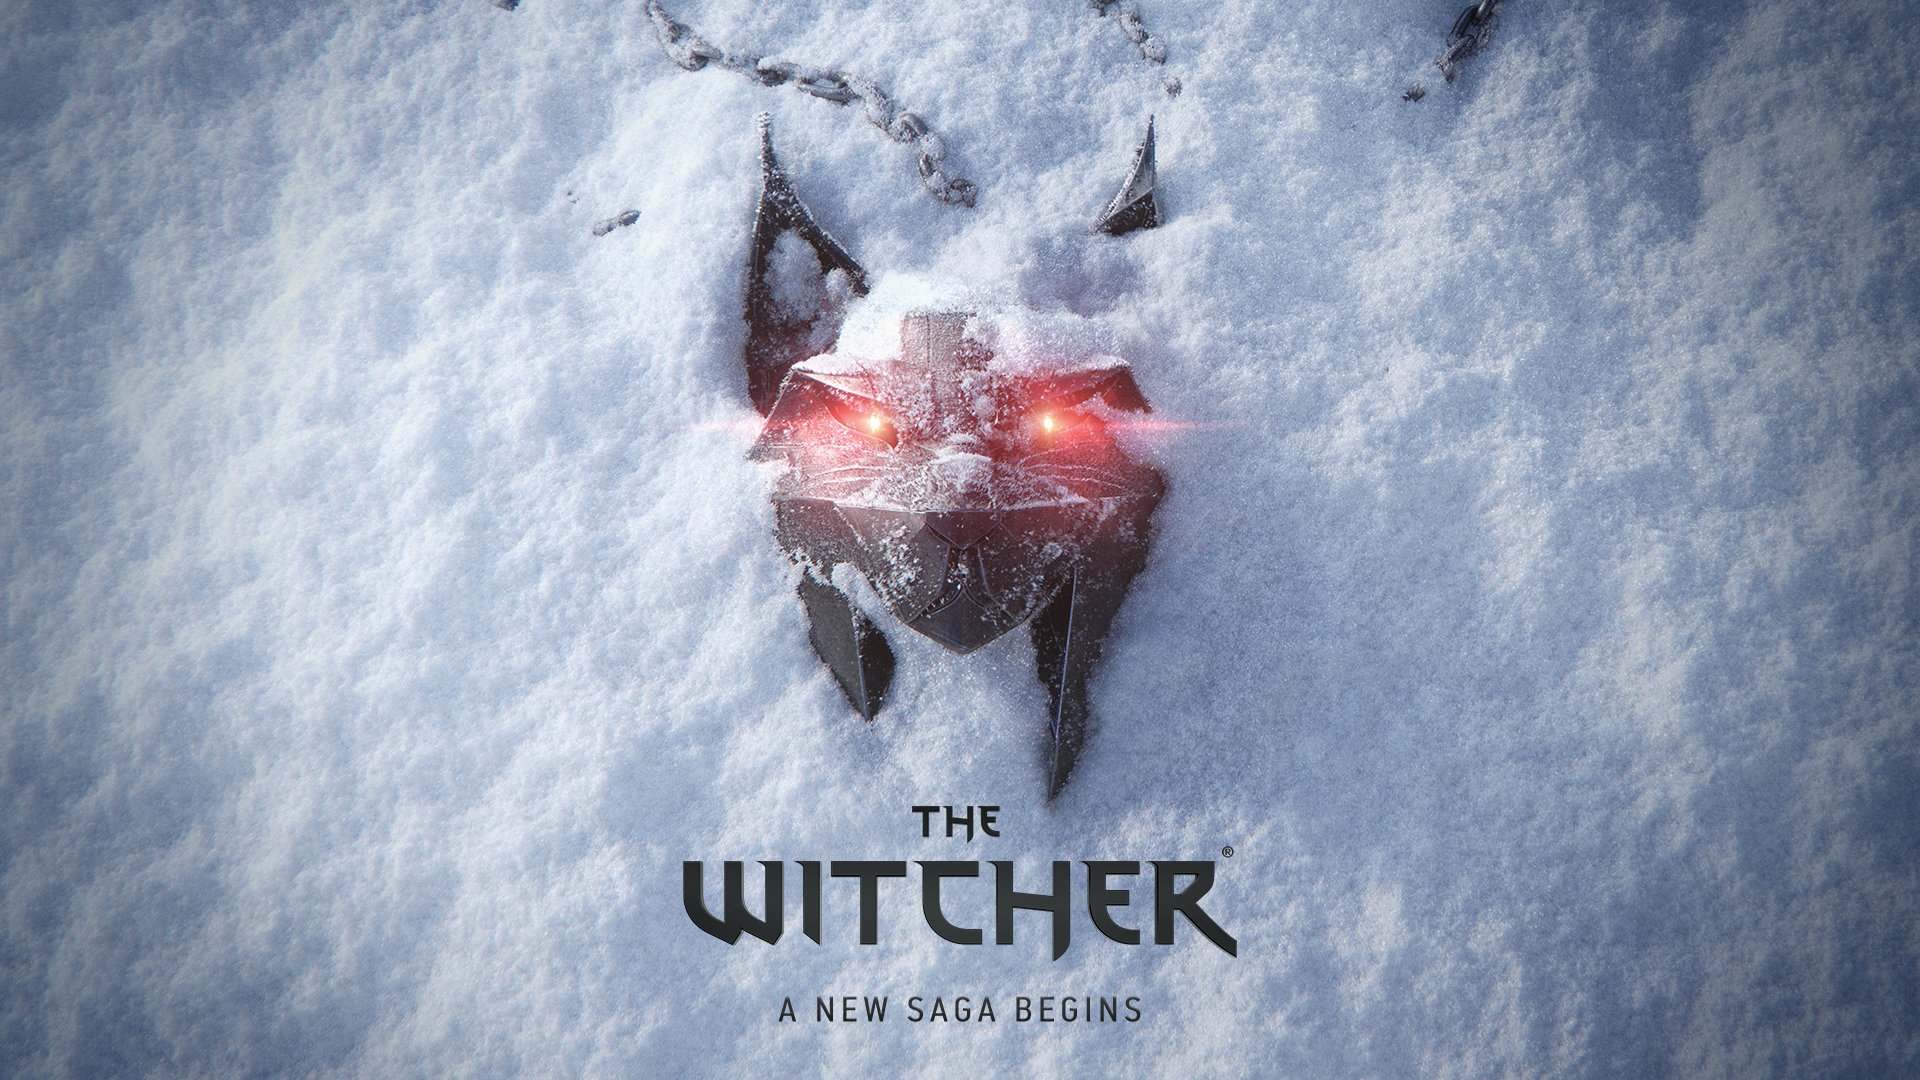 More than 400 CD Projekt RED developers are working on The Witcher 4, but the project is still in pre-production